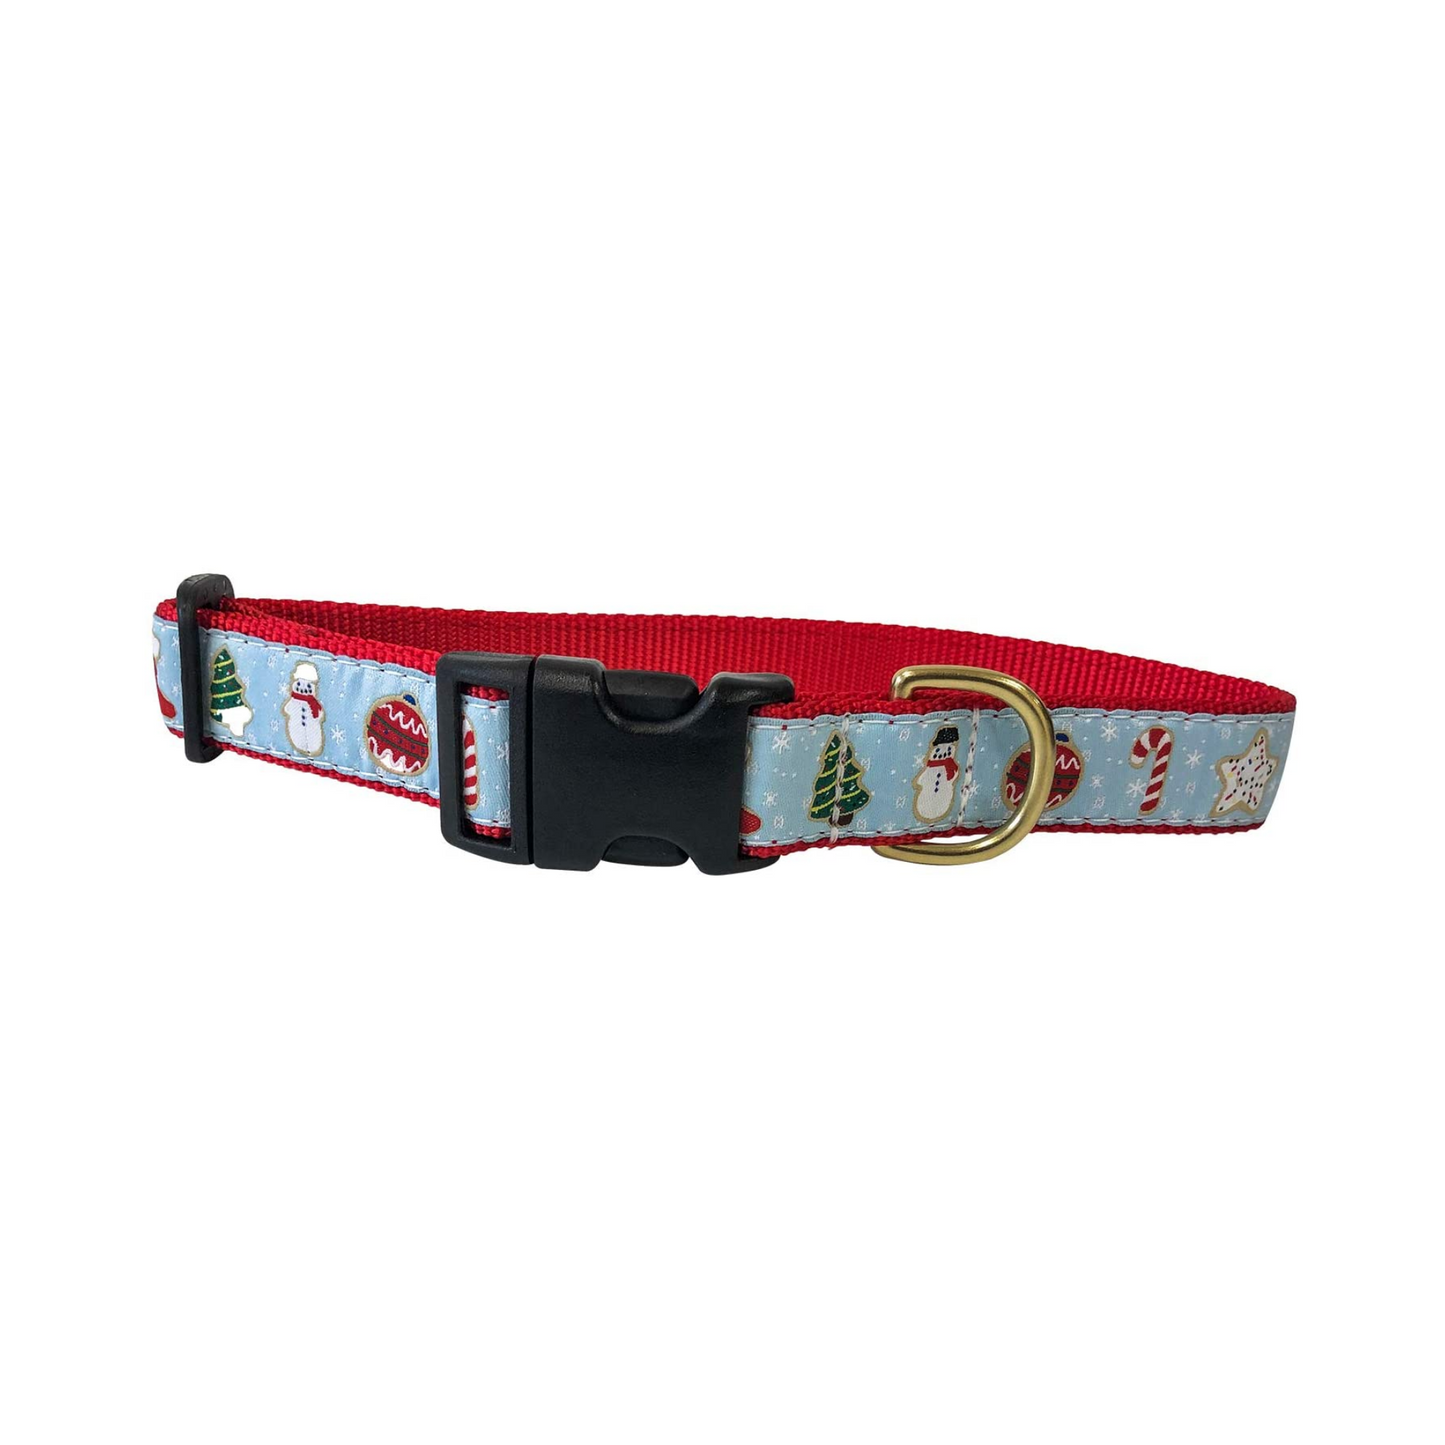 Midlee Christmas Sugar Cookie Dog Collar- Made in The USA